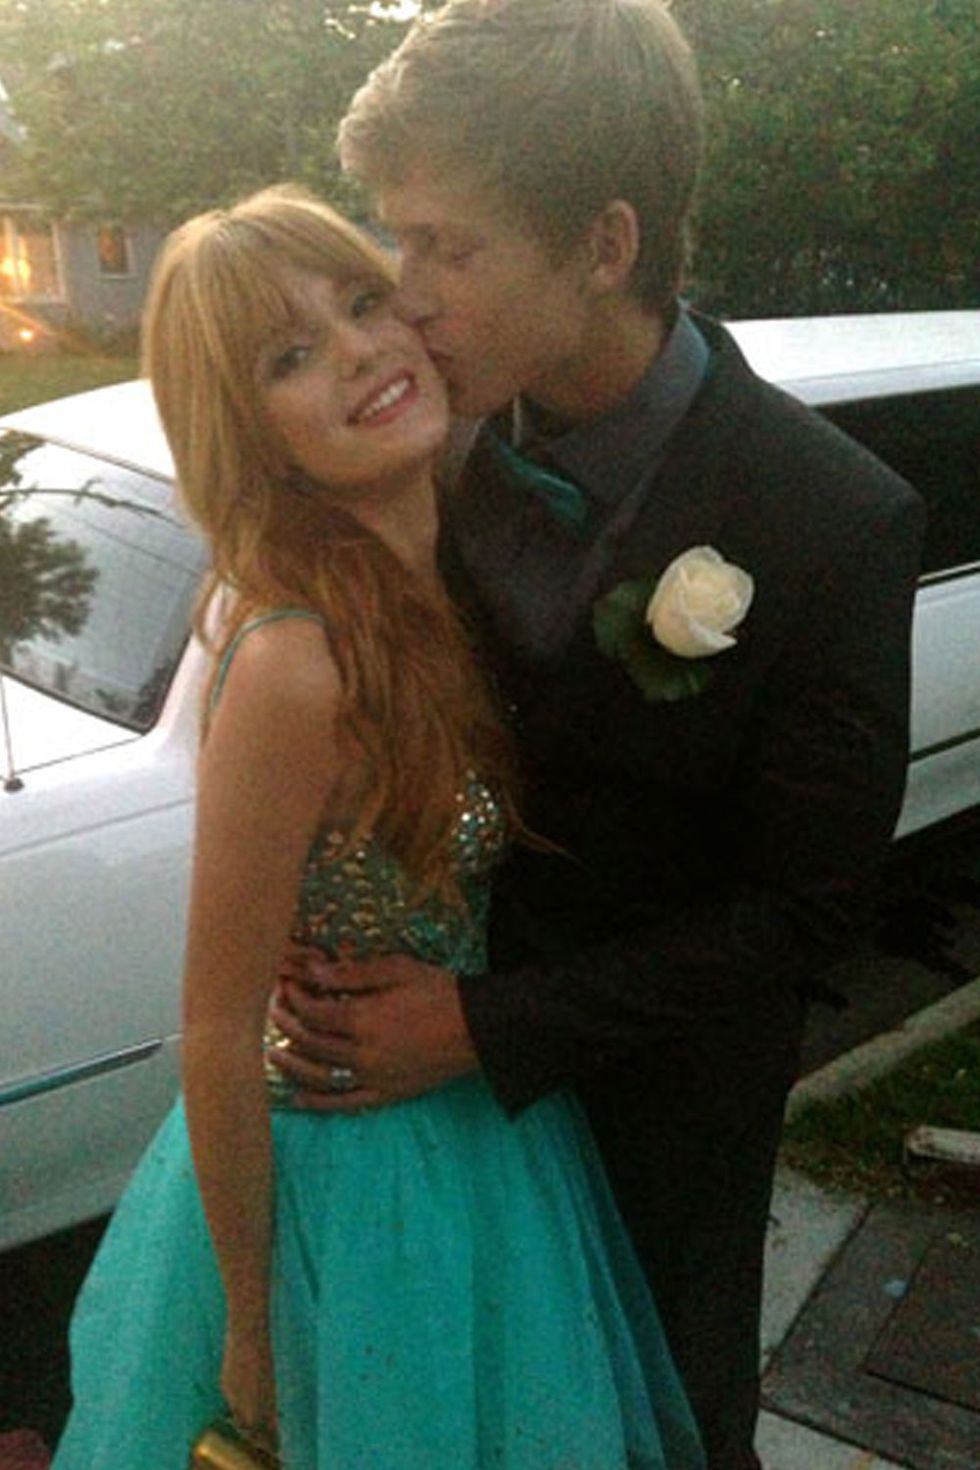 Dress, Prom, Formal wear, Smile, Interaction, Public event, Blond, Event, Fun, Long hair, 